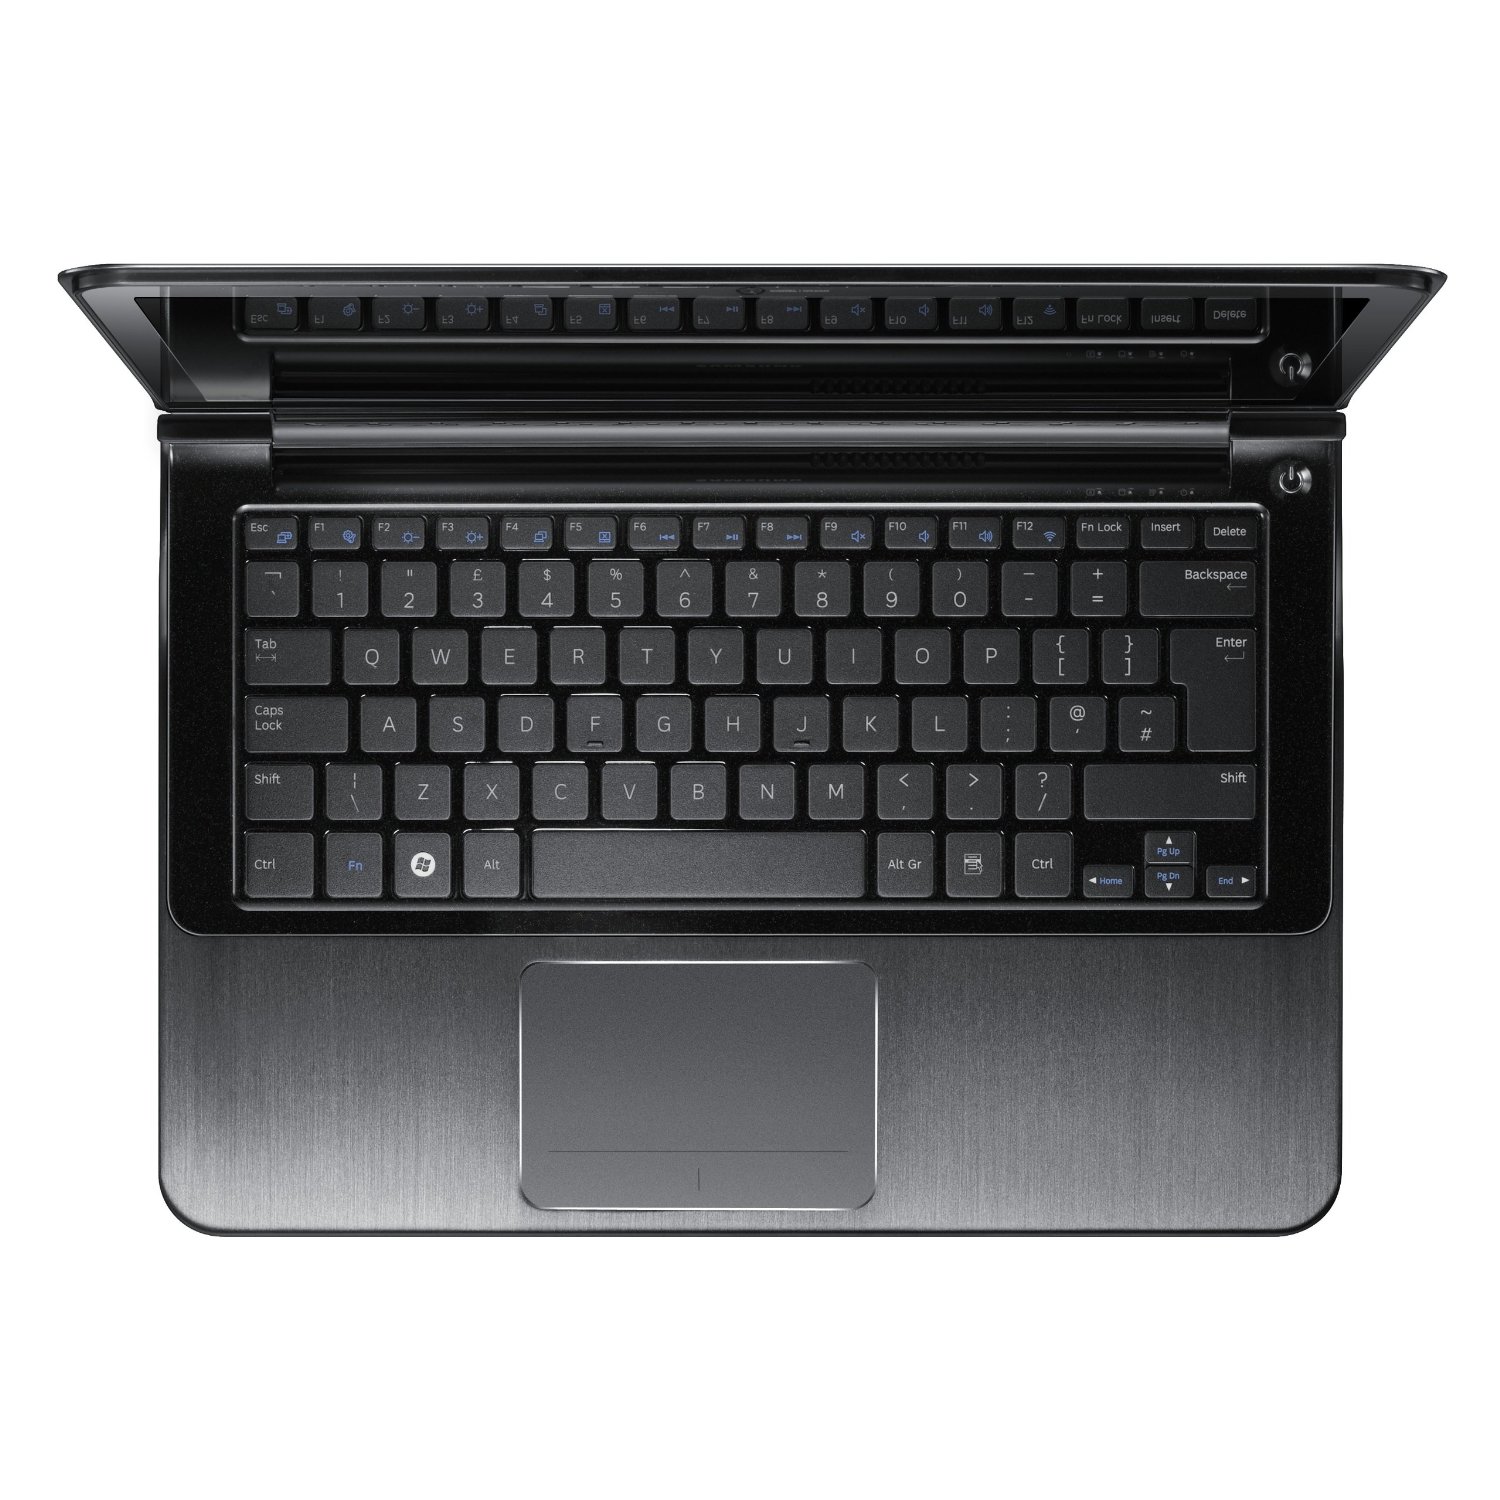 http://thetechjournal.com/wp-content/uploads/images/1108/1312961318-samsung-series-9-np900x3aa02us-133inch-laptop-5.jpg